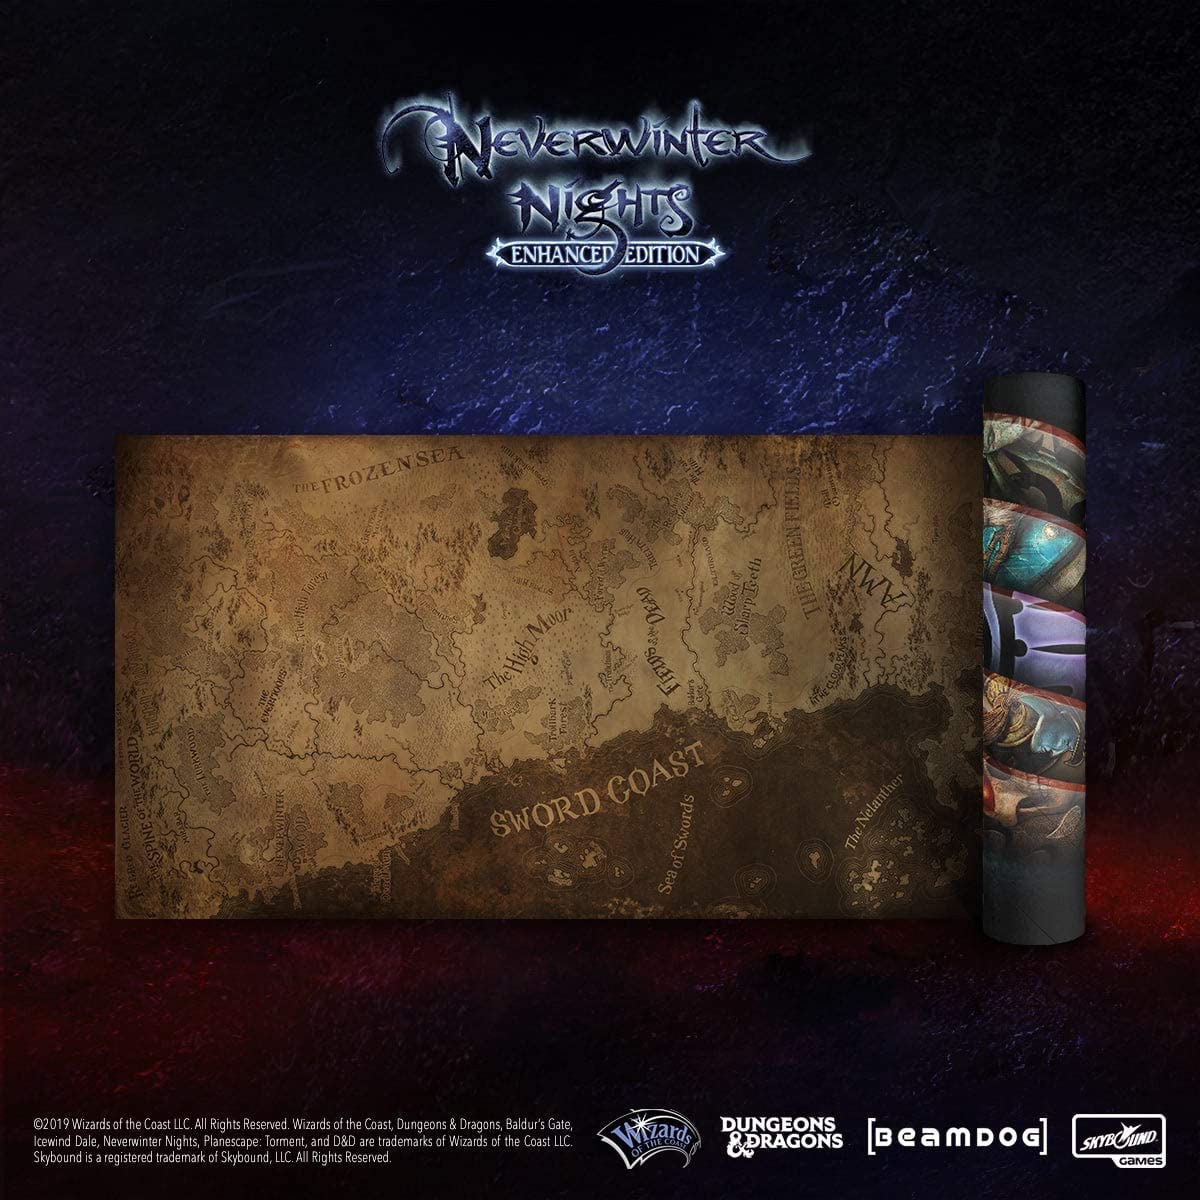 Neverwinter Nights Enhanced Edition Collector's Pack (Nintendo Switch)